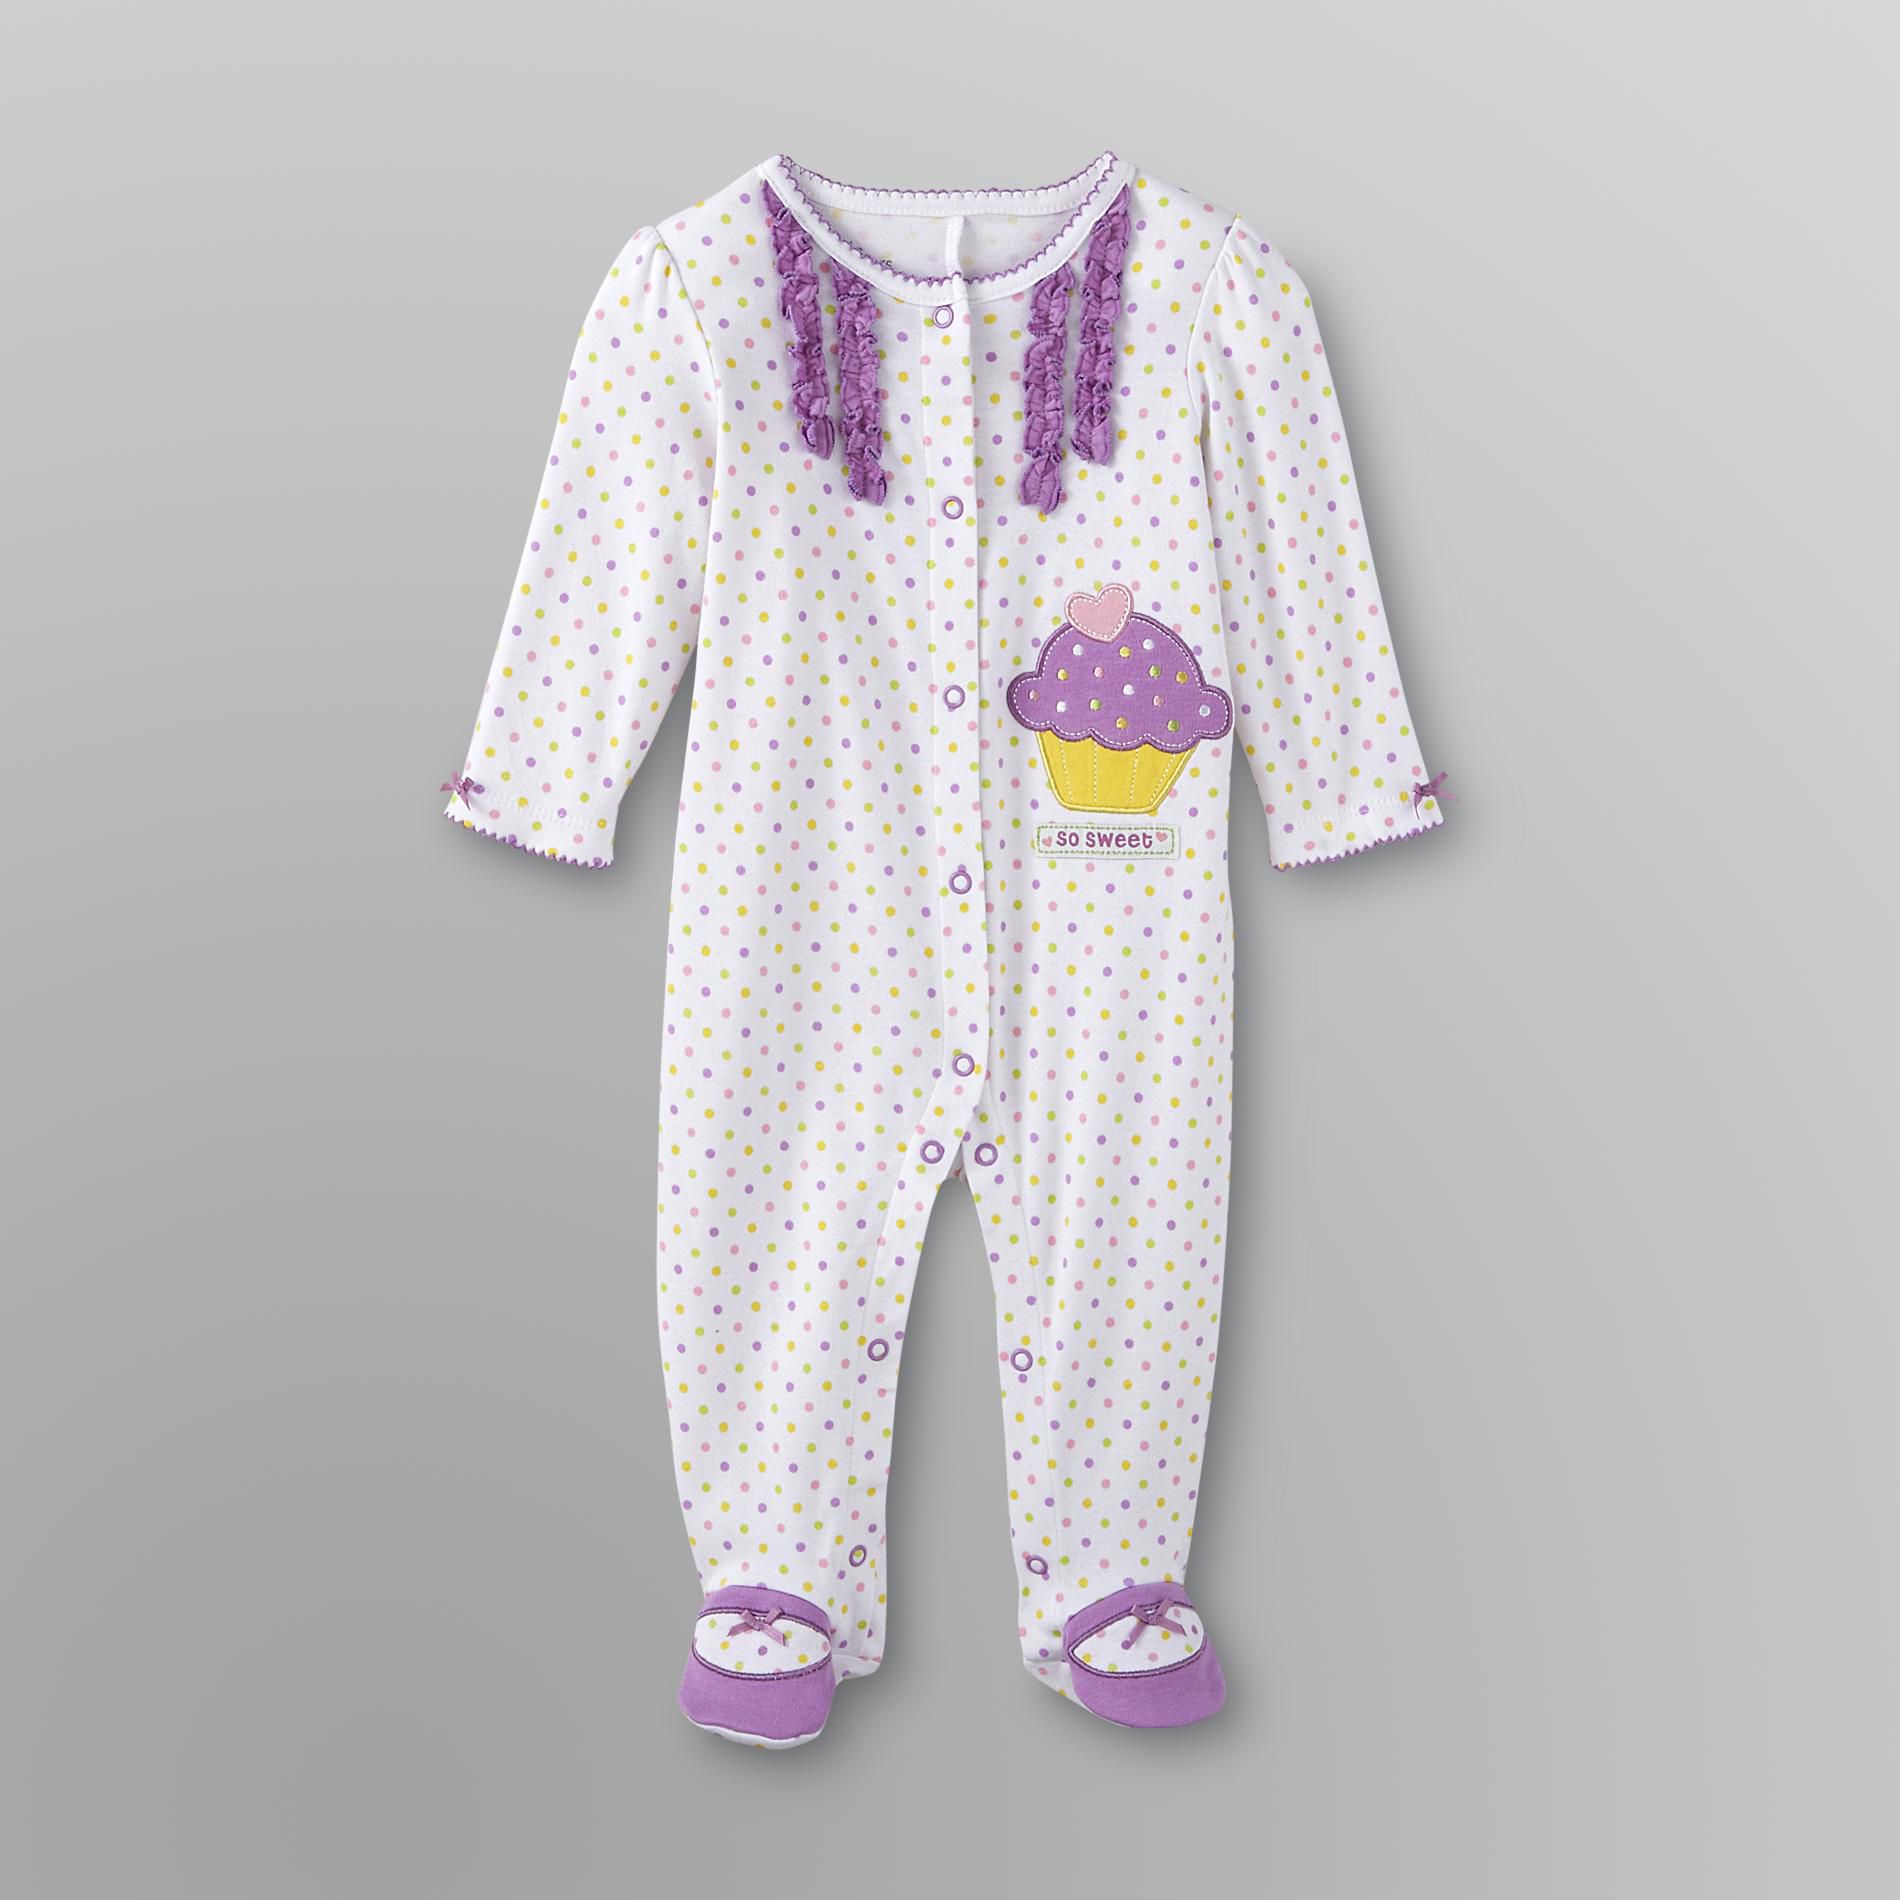 Little Wonders Infant Girl's Footed Pajamas - Cupcake